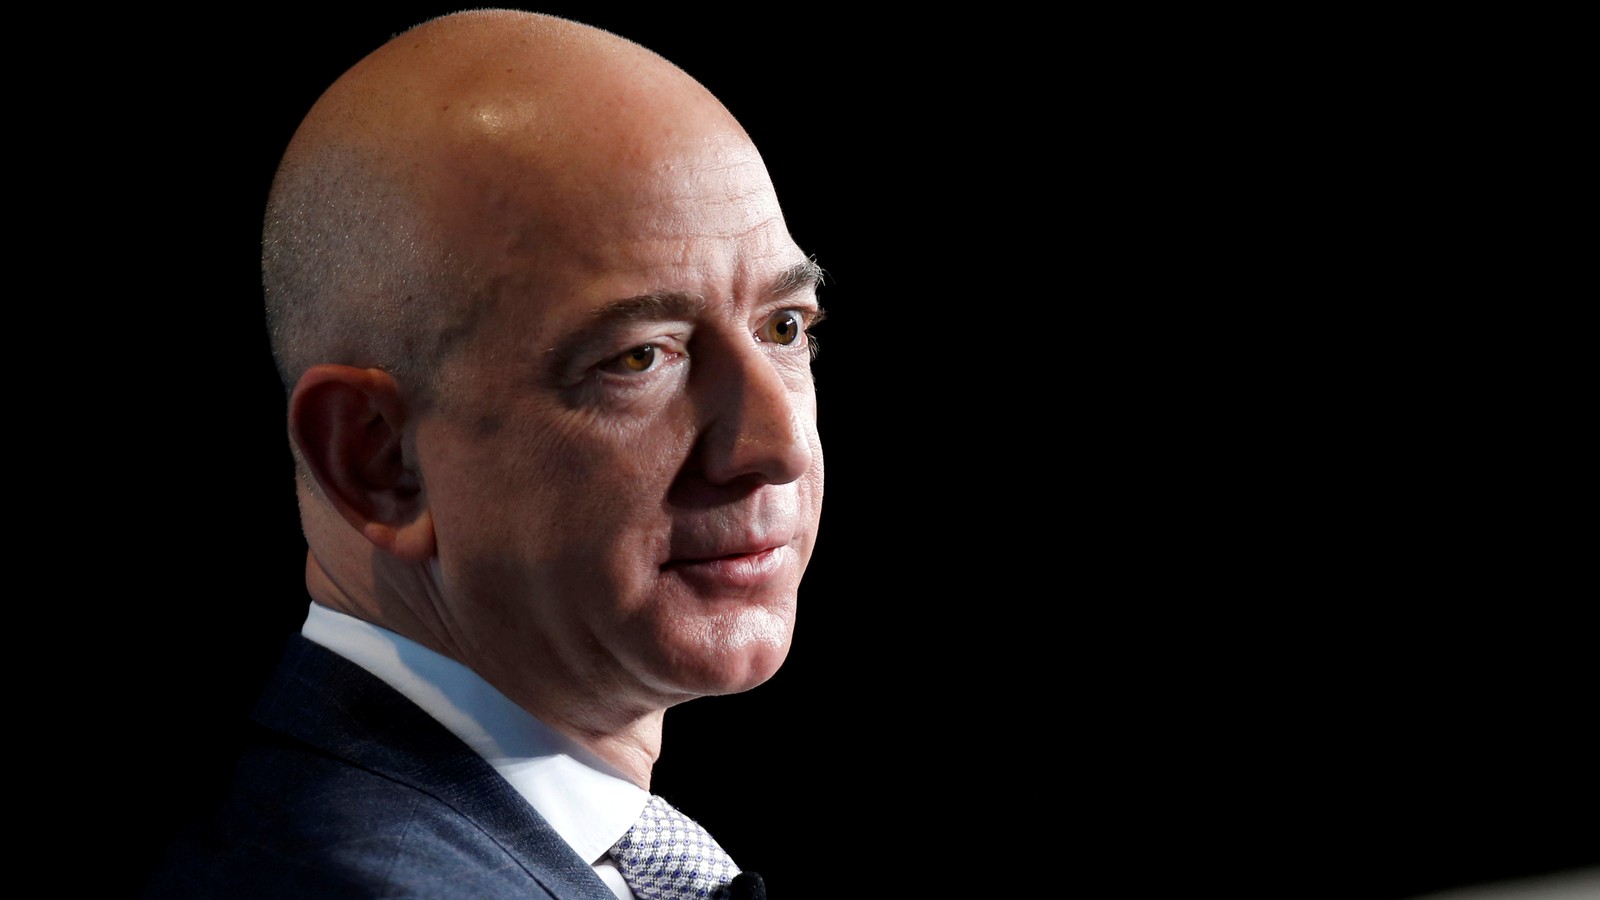 Blackmail Sex Video - Sextortion: Is Jeff Bezos's Stand a Turning Point? - The Atlantic